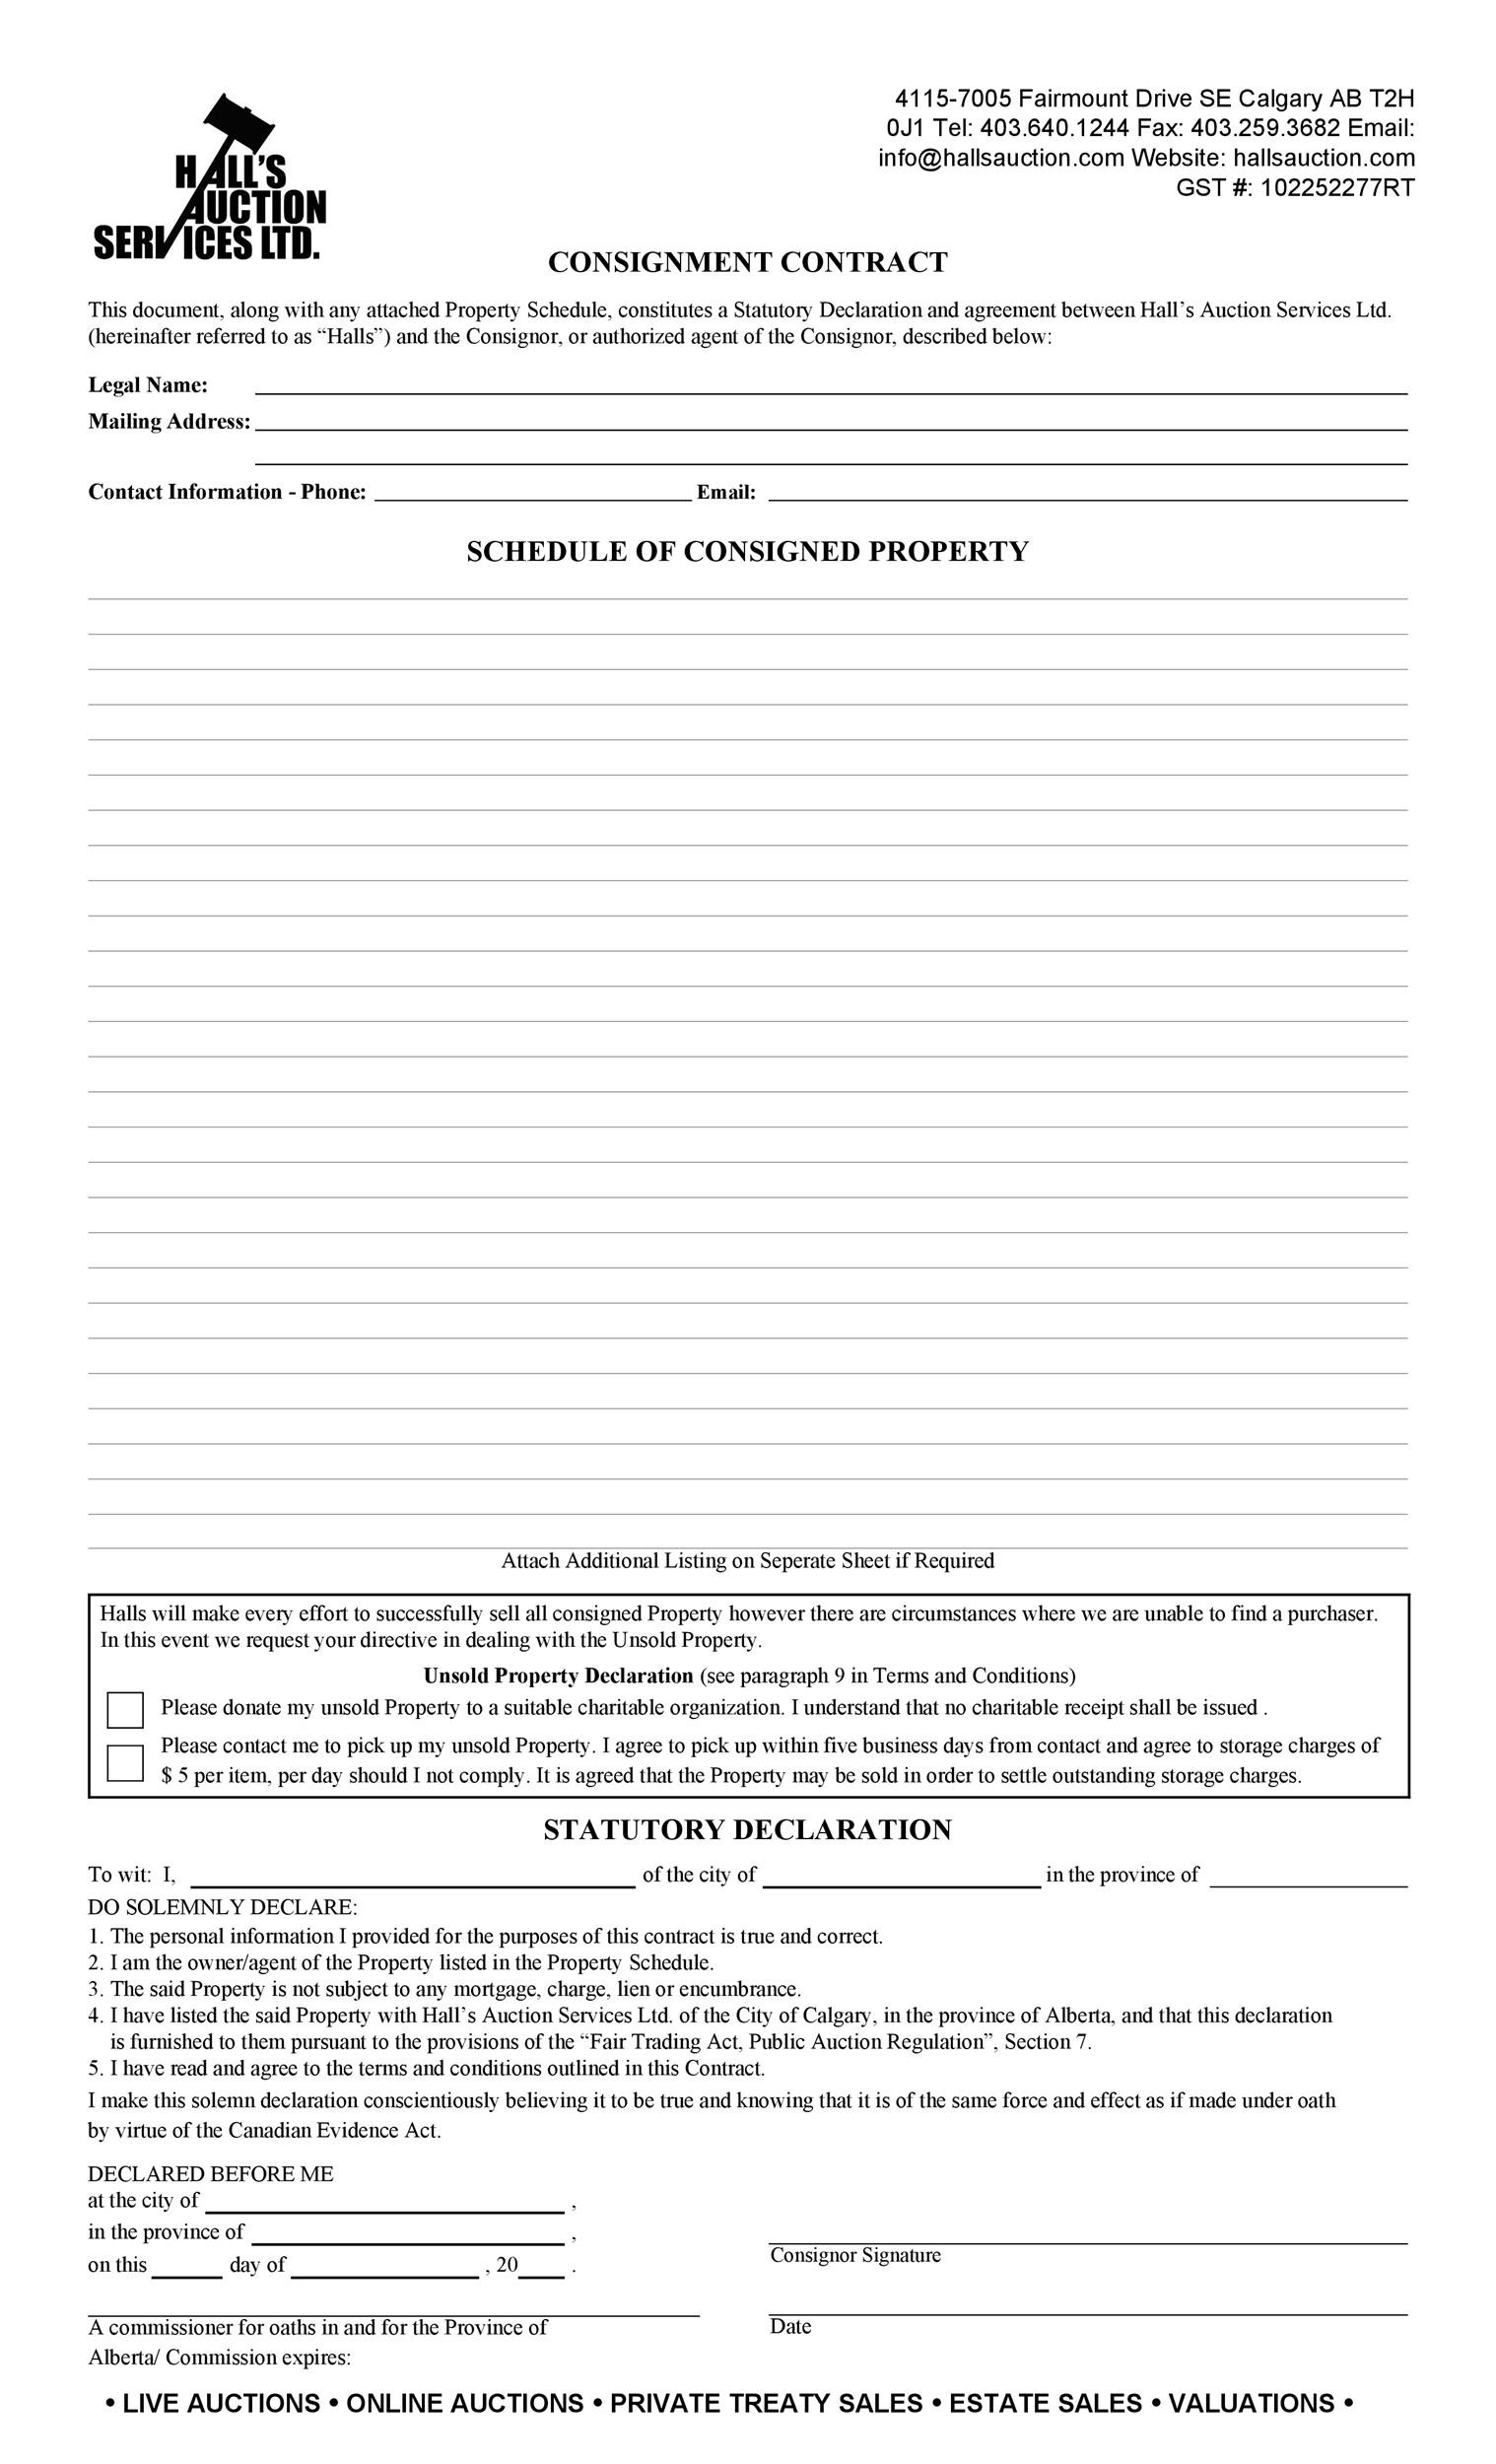 40+ Best Consignment Agreement Templates & Forms ᐅ TemplateLab